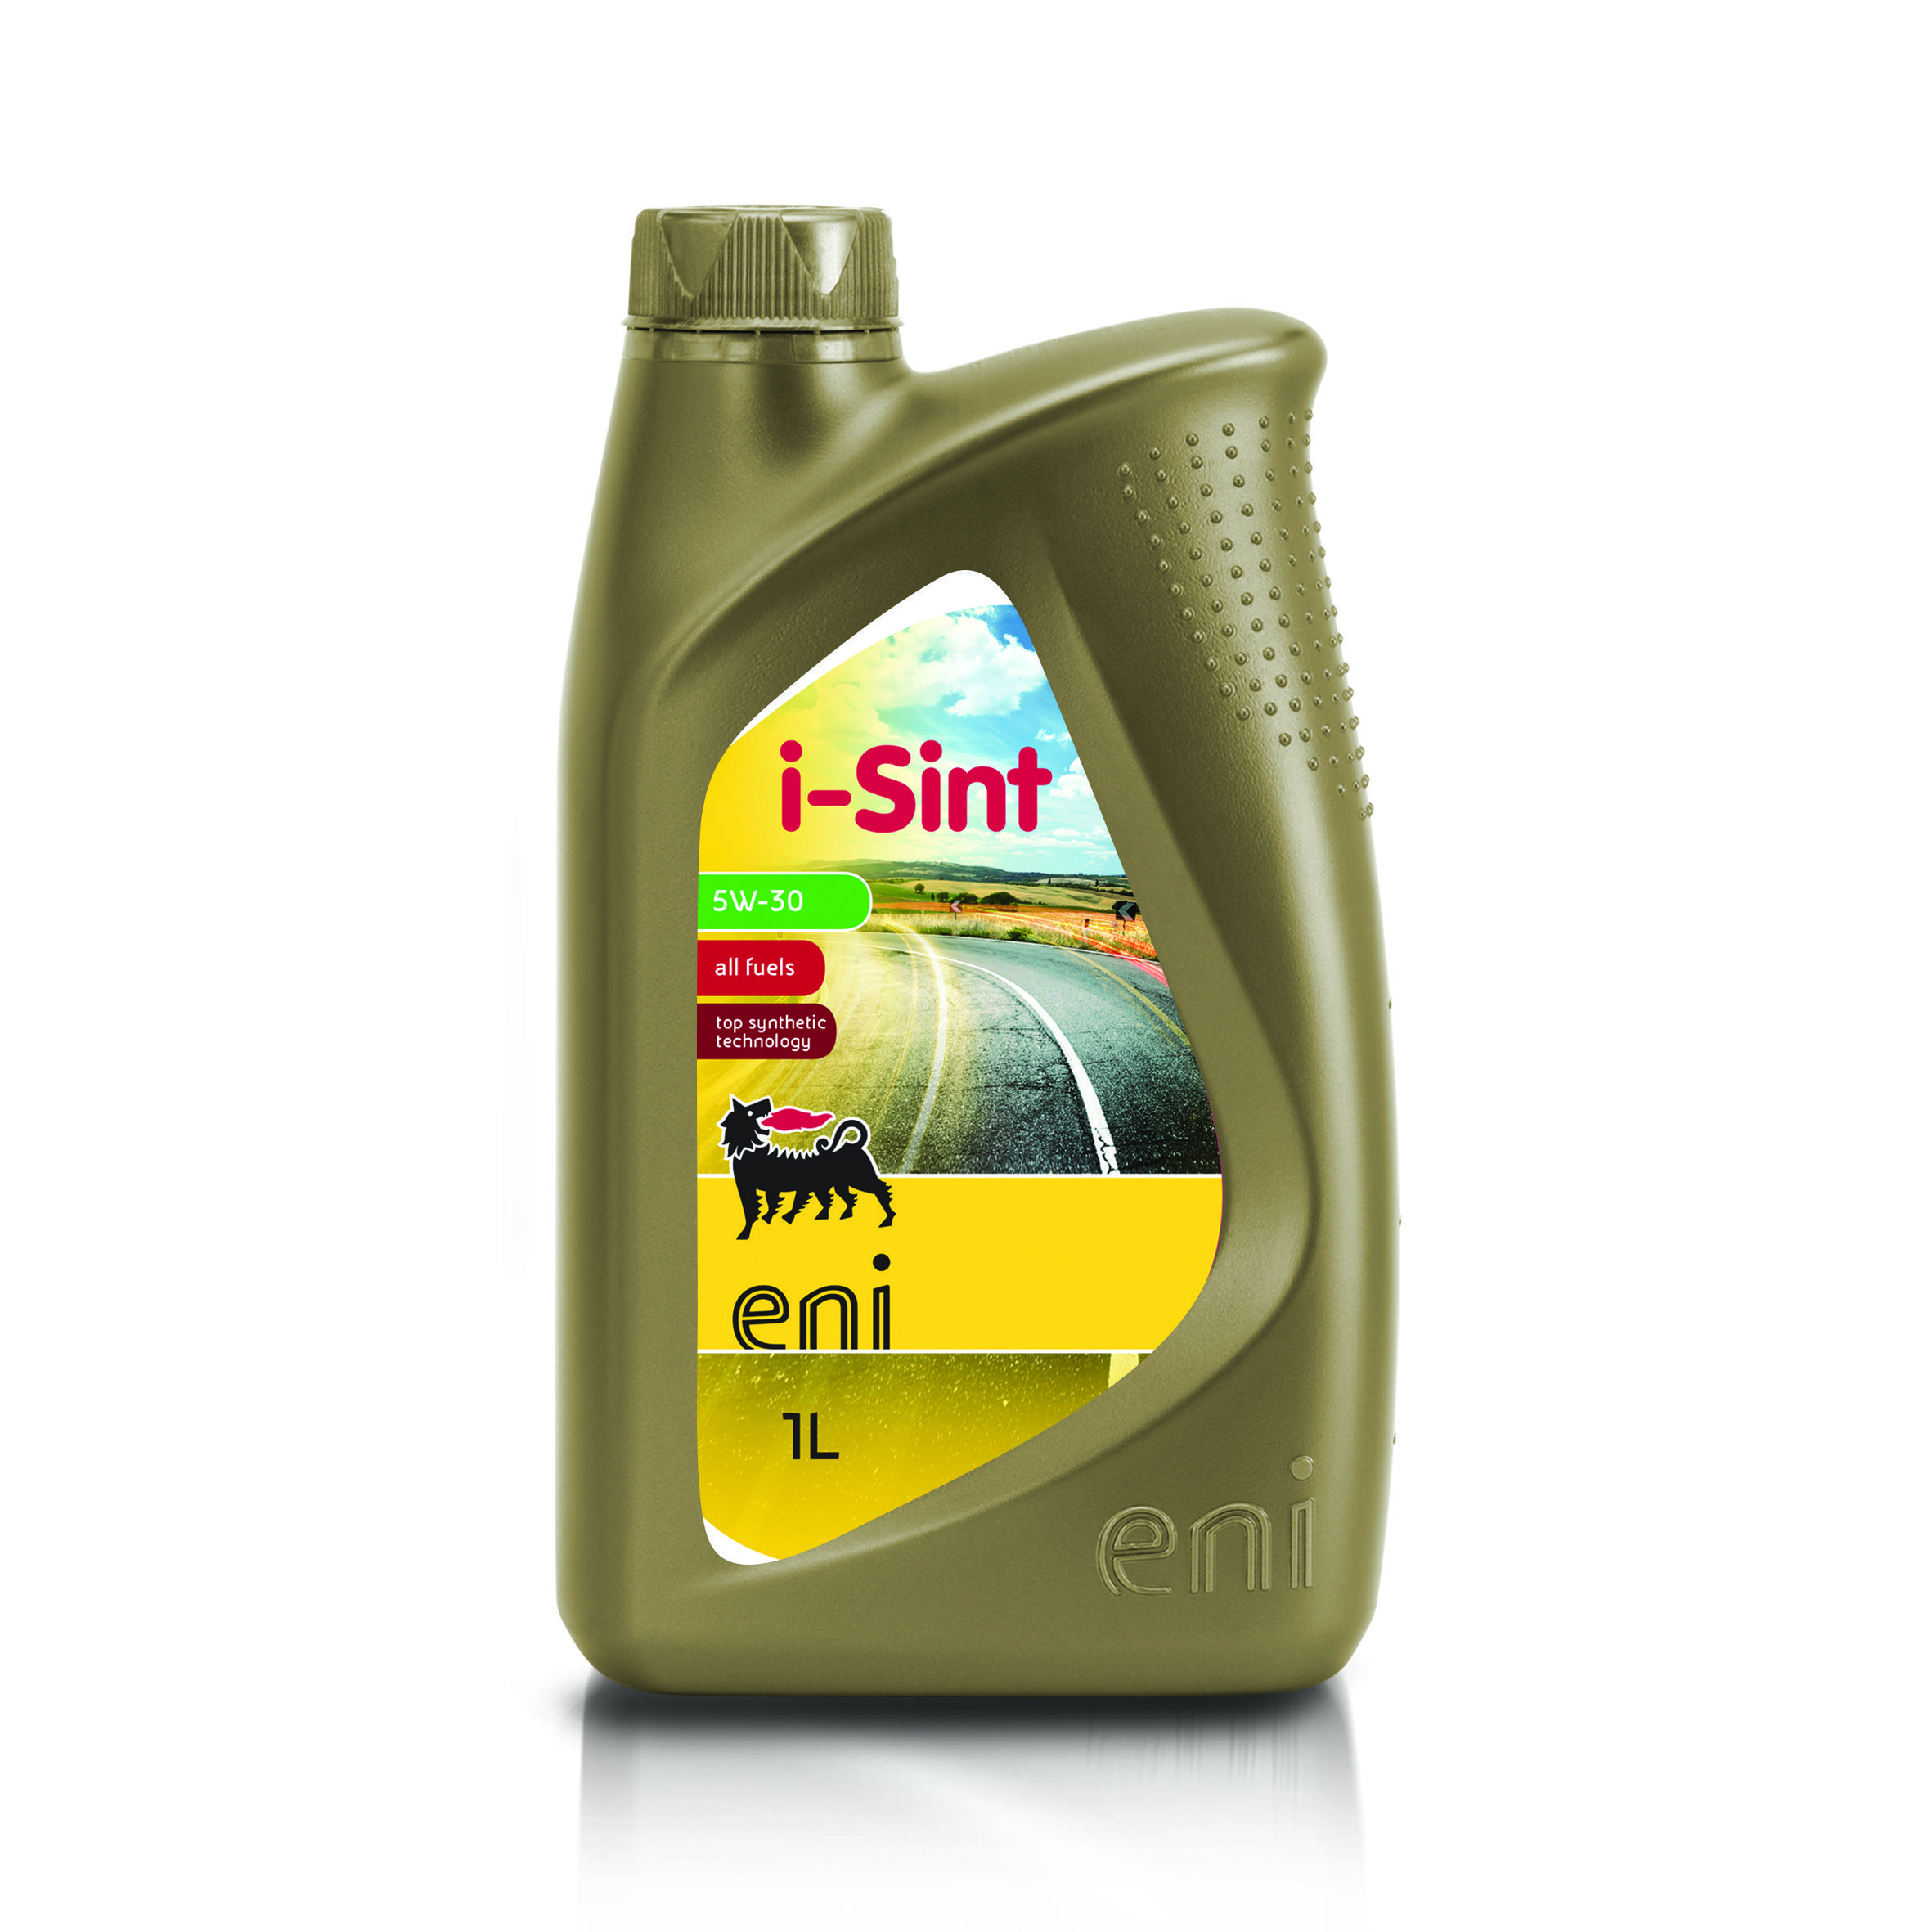 Масло eni 5w30. Моторное масло Eni 5w-30. Моторное масло Eni i-Sint 5w30. Eni i-Sint 5w-40. Eni i-Sint 5w-30.